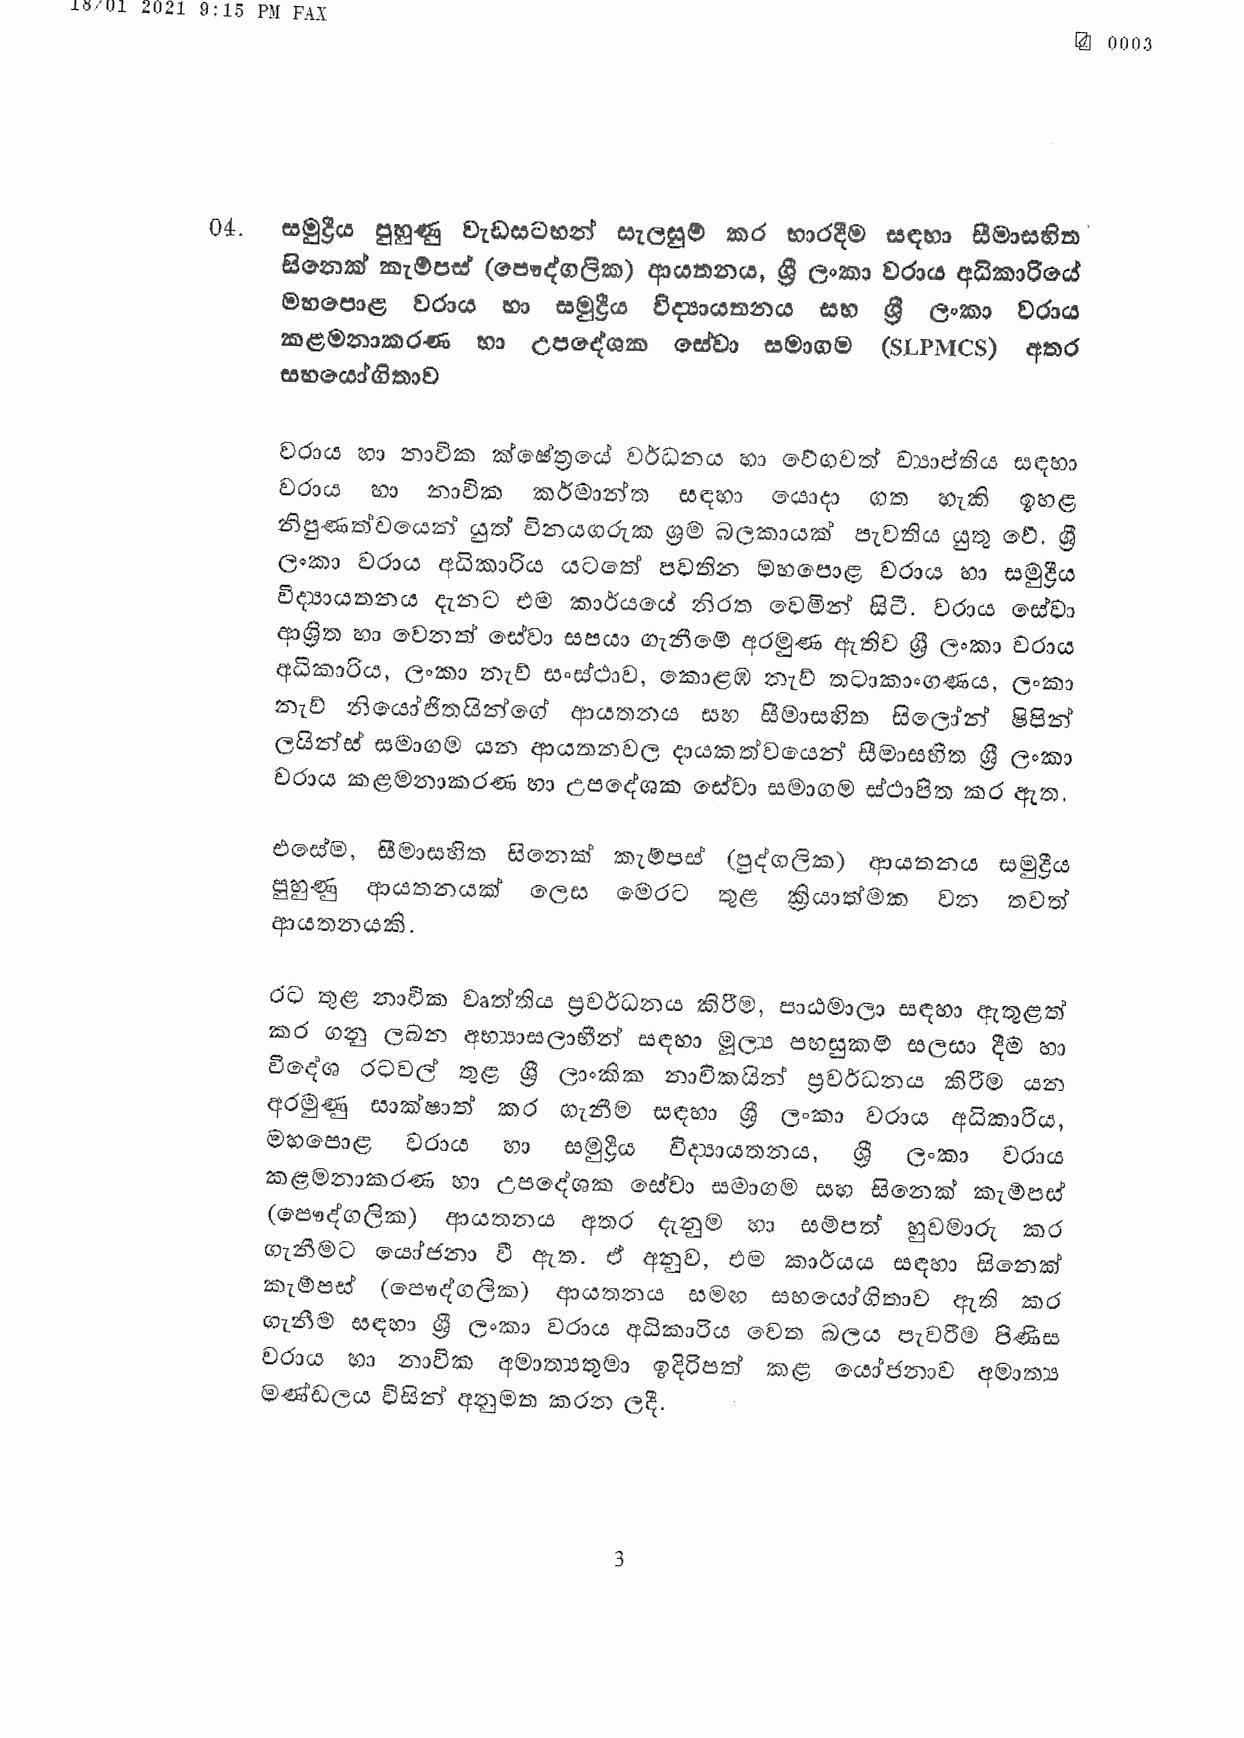 Cabinet Decision on 18.01.2021 page 003